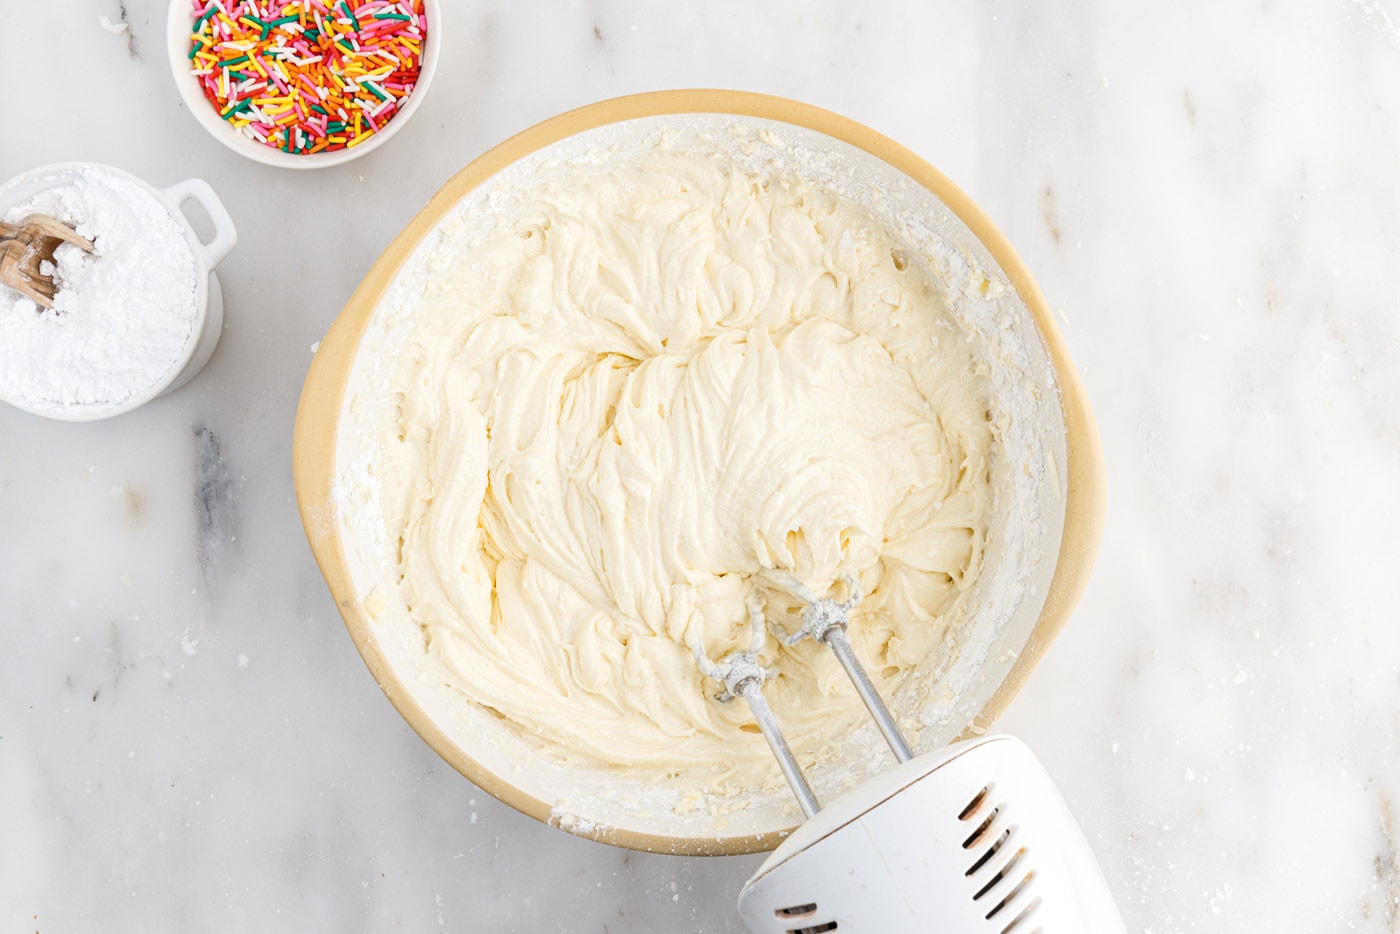 beating cake batter with a hand mixer